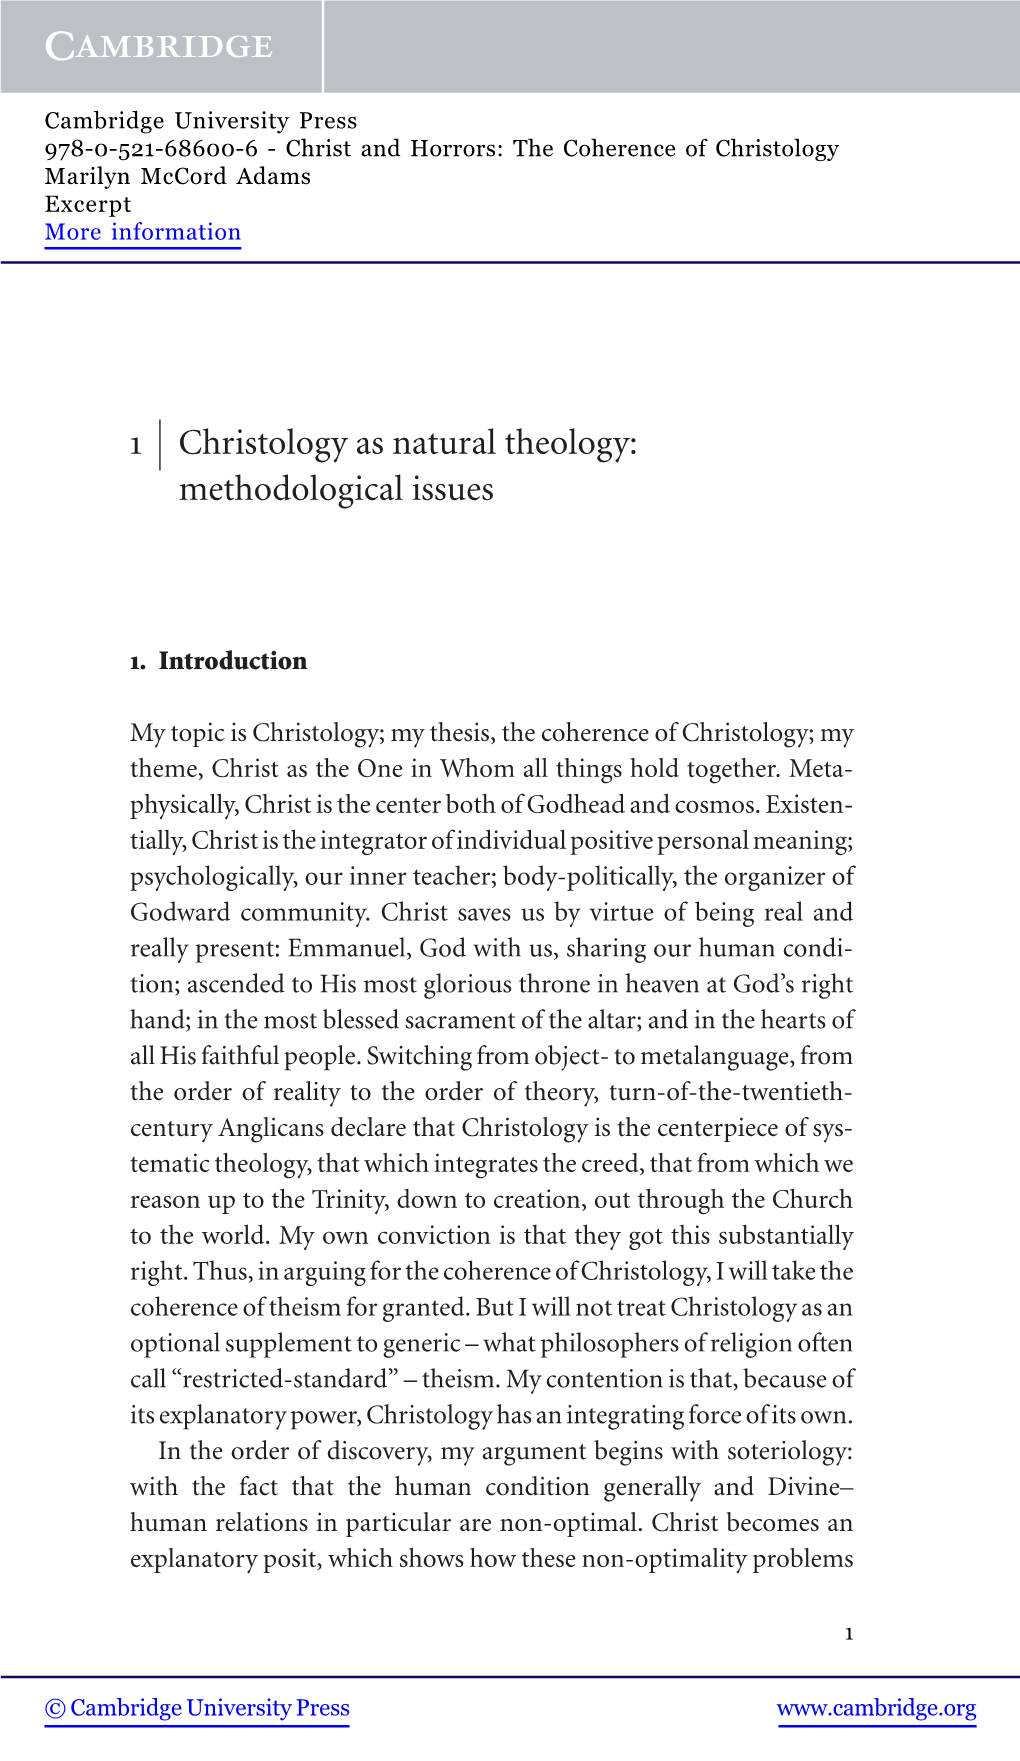 1 Christology As Natural Theology: Methodological Issues